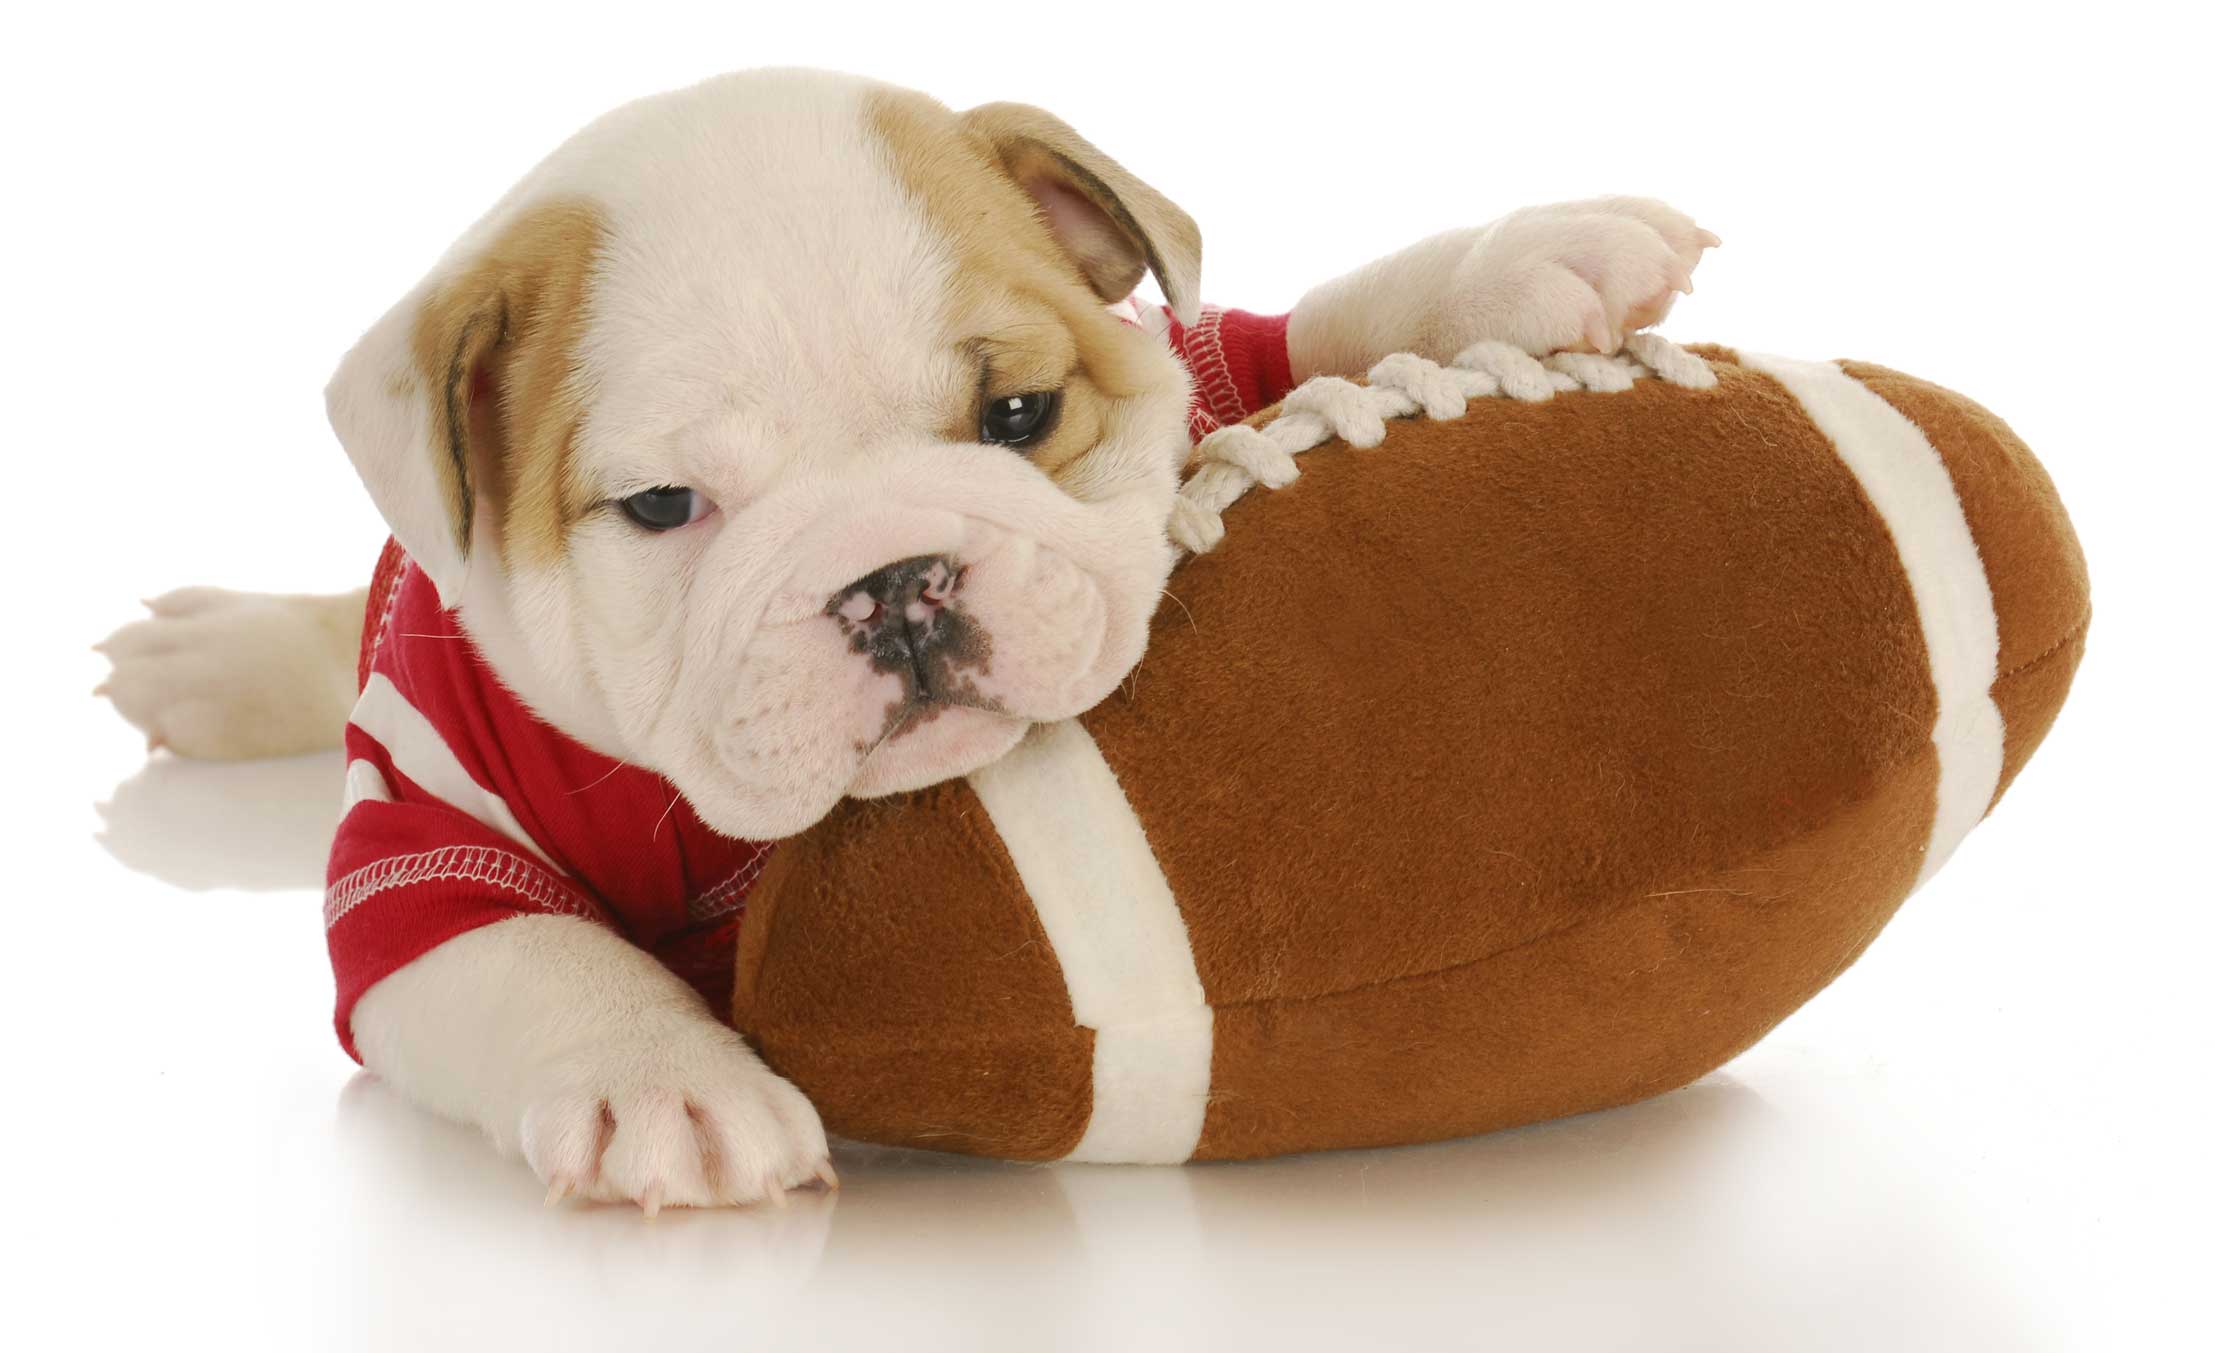 Puppy Bowl brings awareness to shelter animals with puppy football